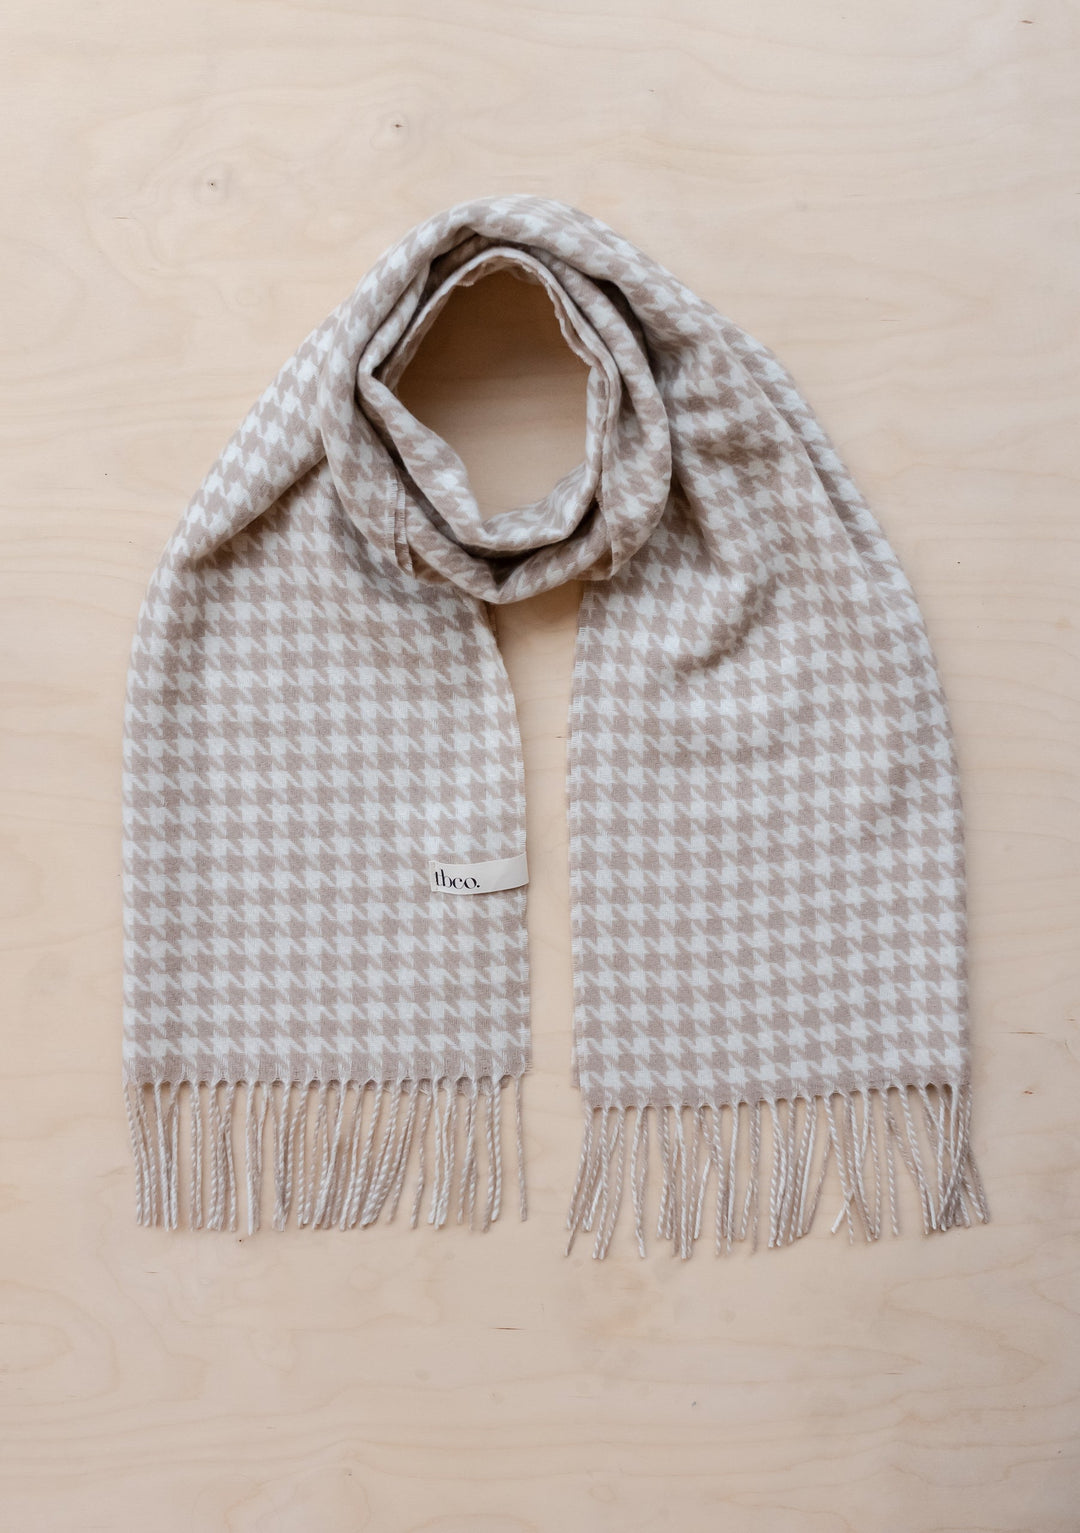 Lambswool Oversized Scarf in Cream Houndstooth